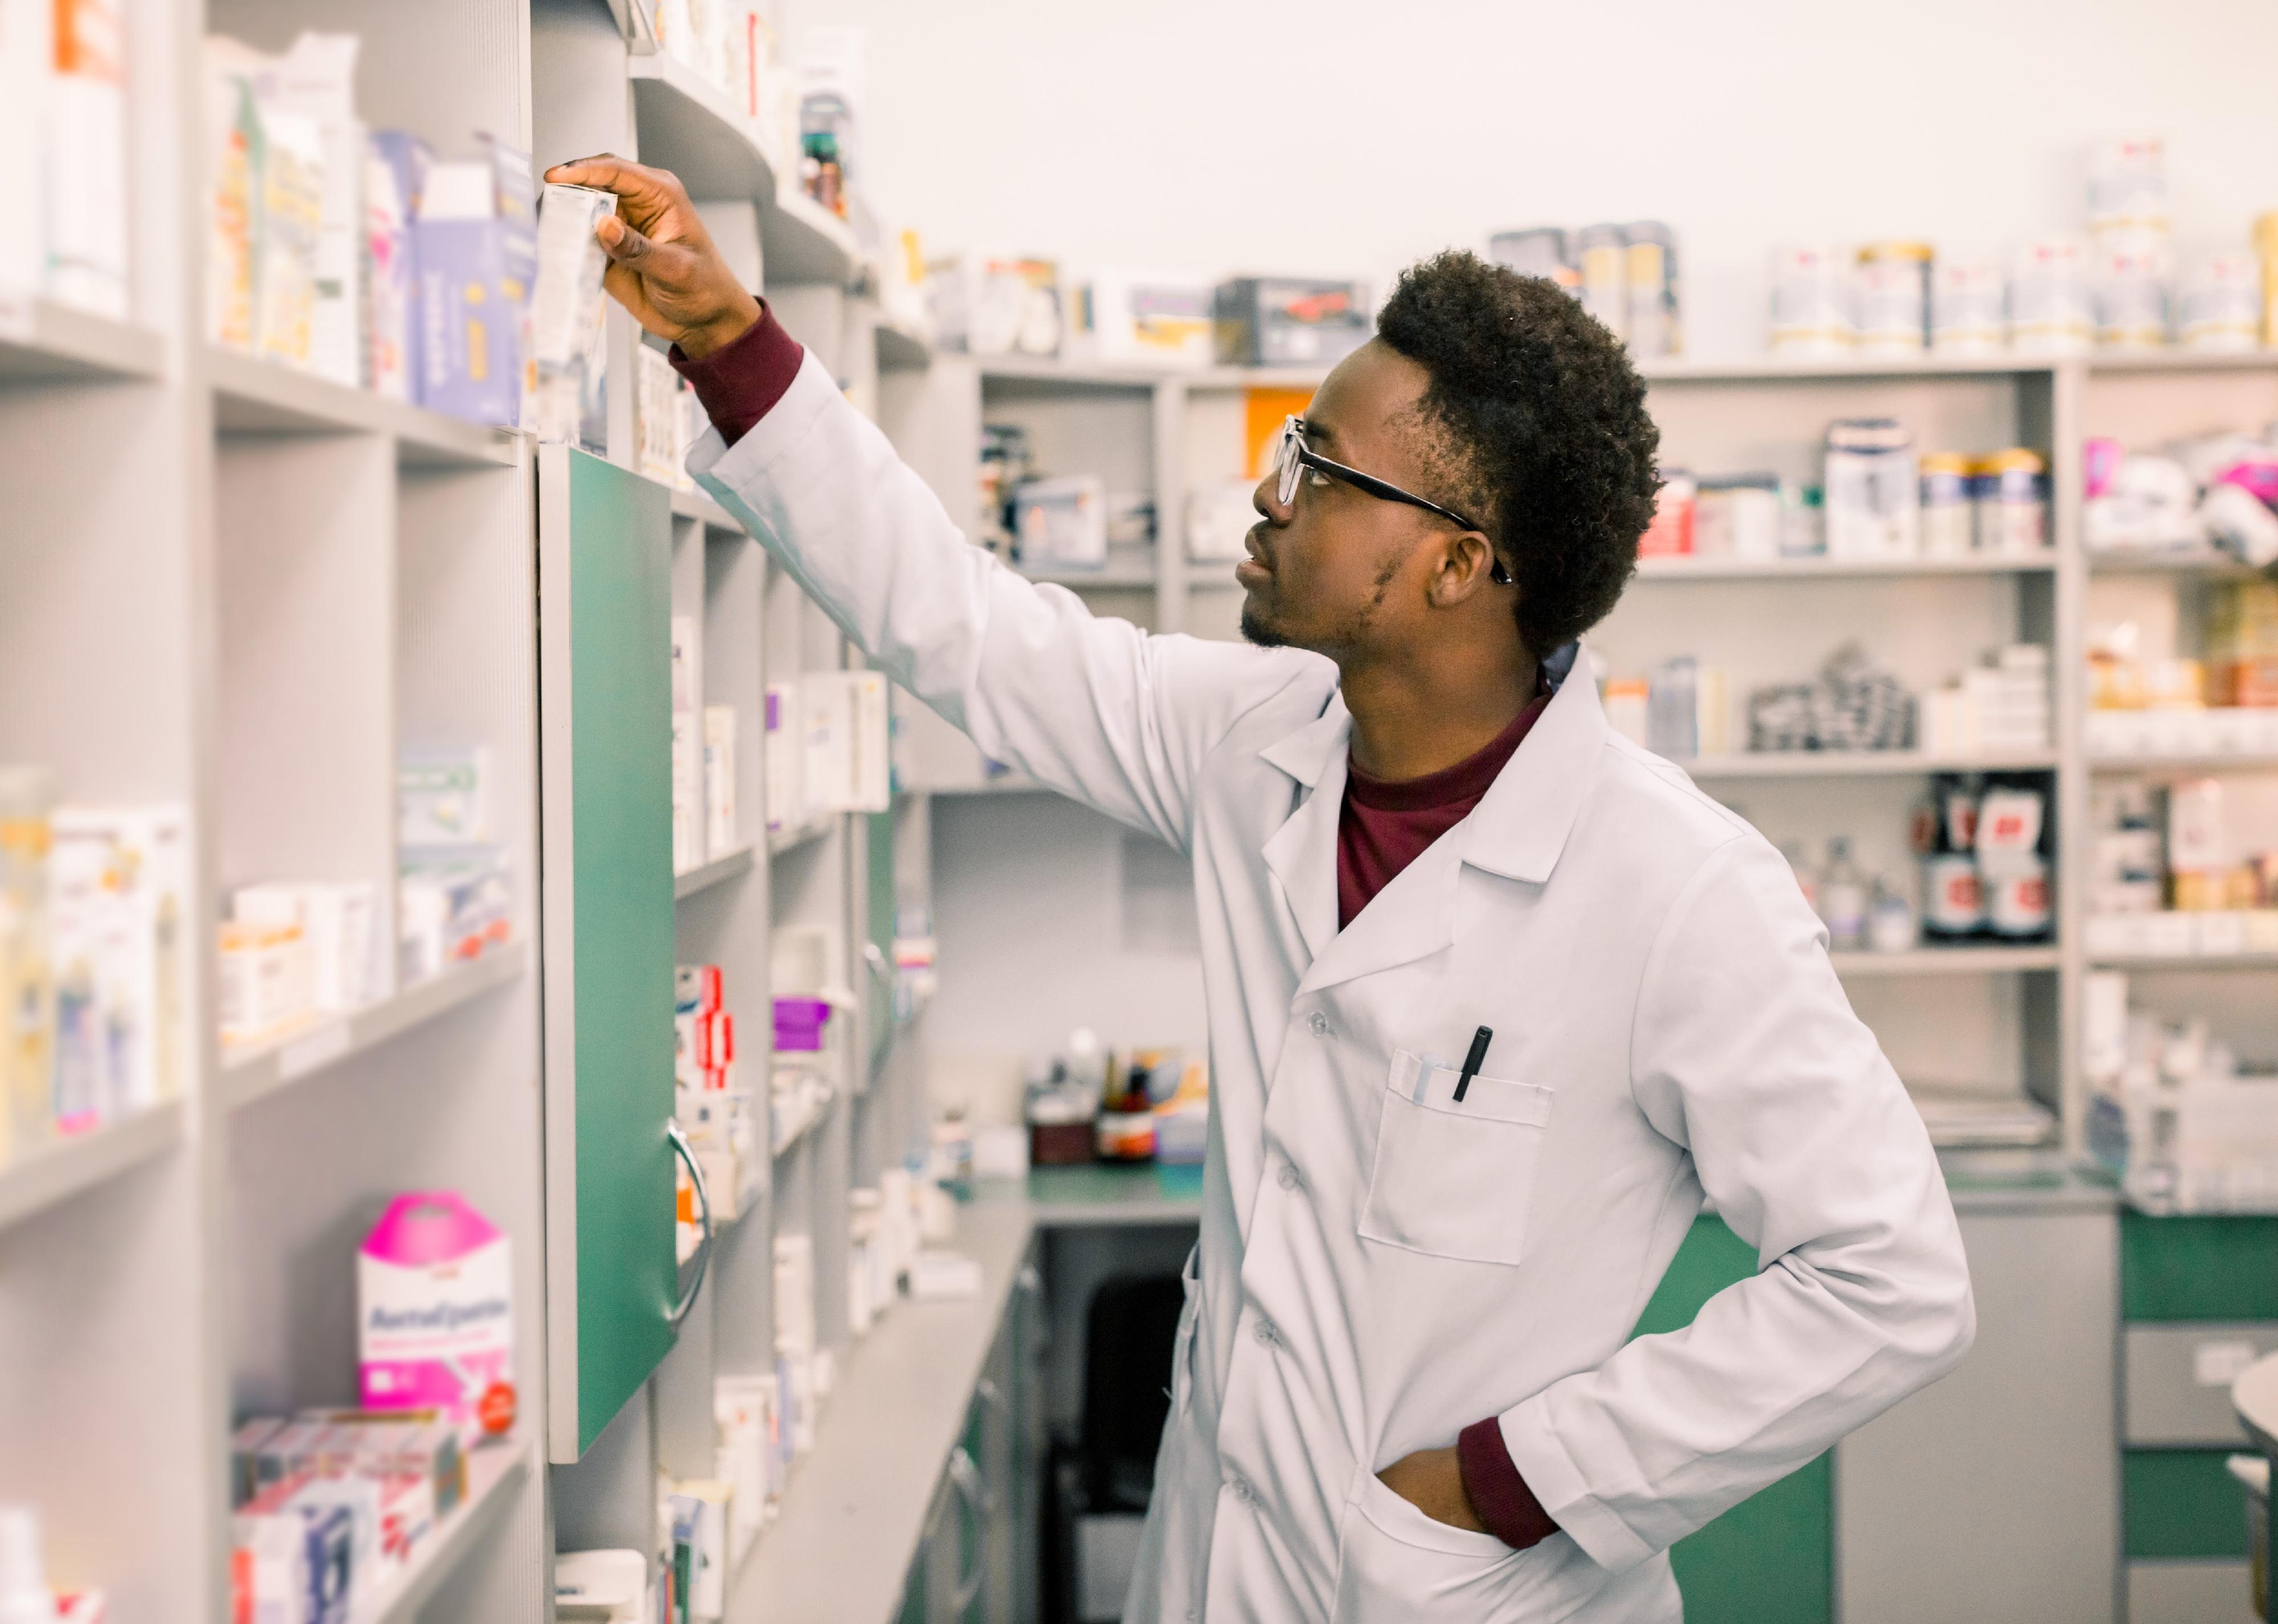 Pharmacist standing in interior of pharmacy and searching shelves.